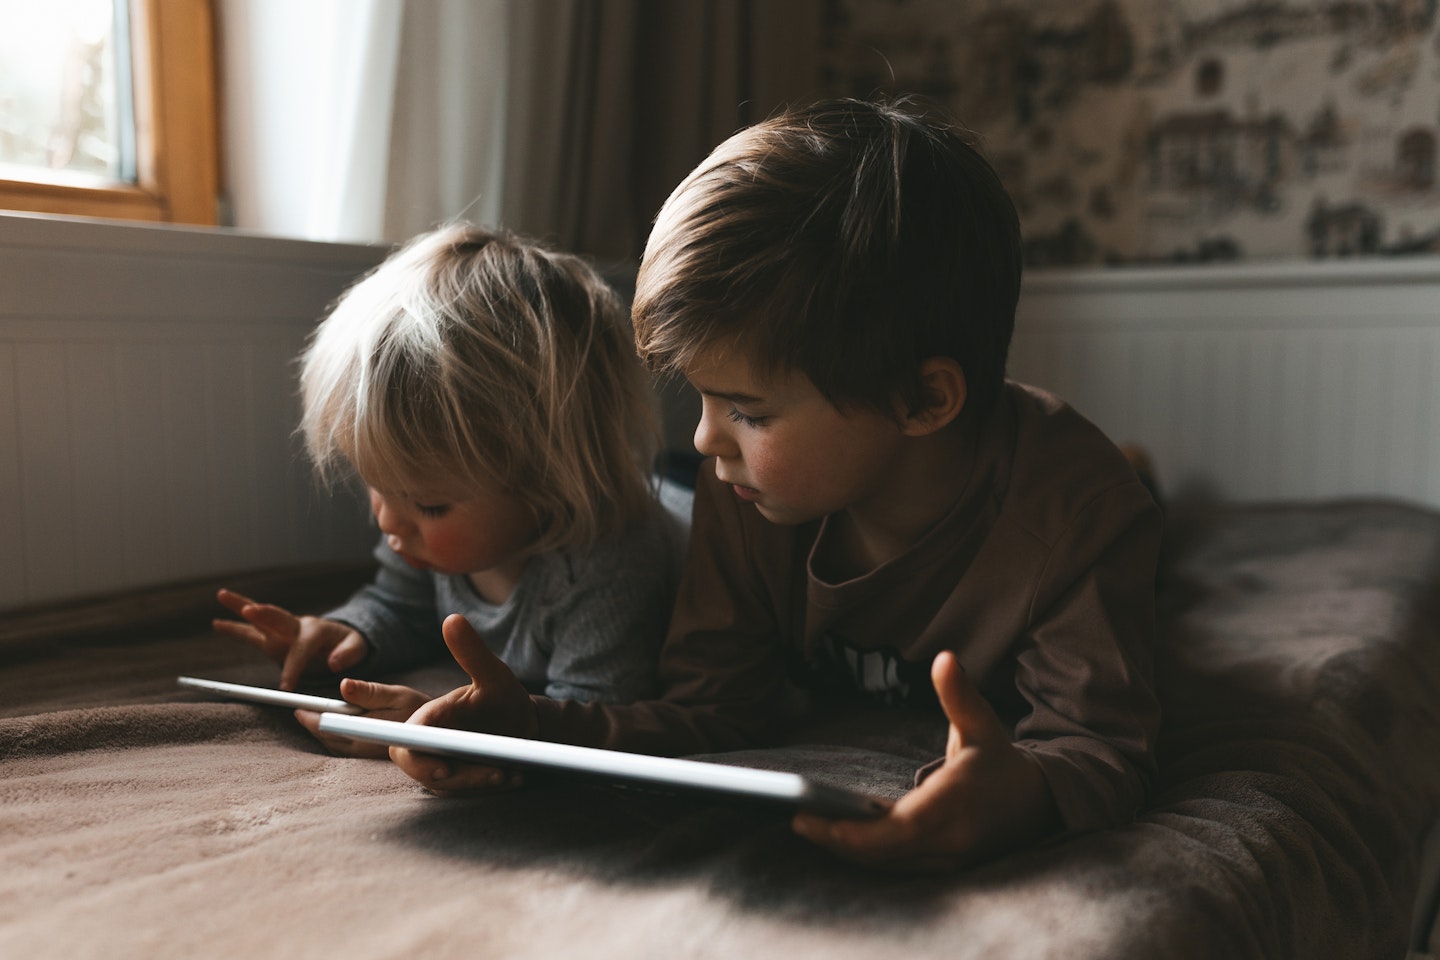 Kids and screentime